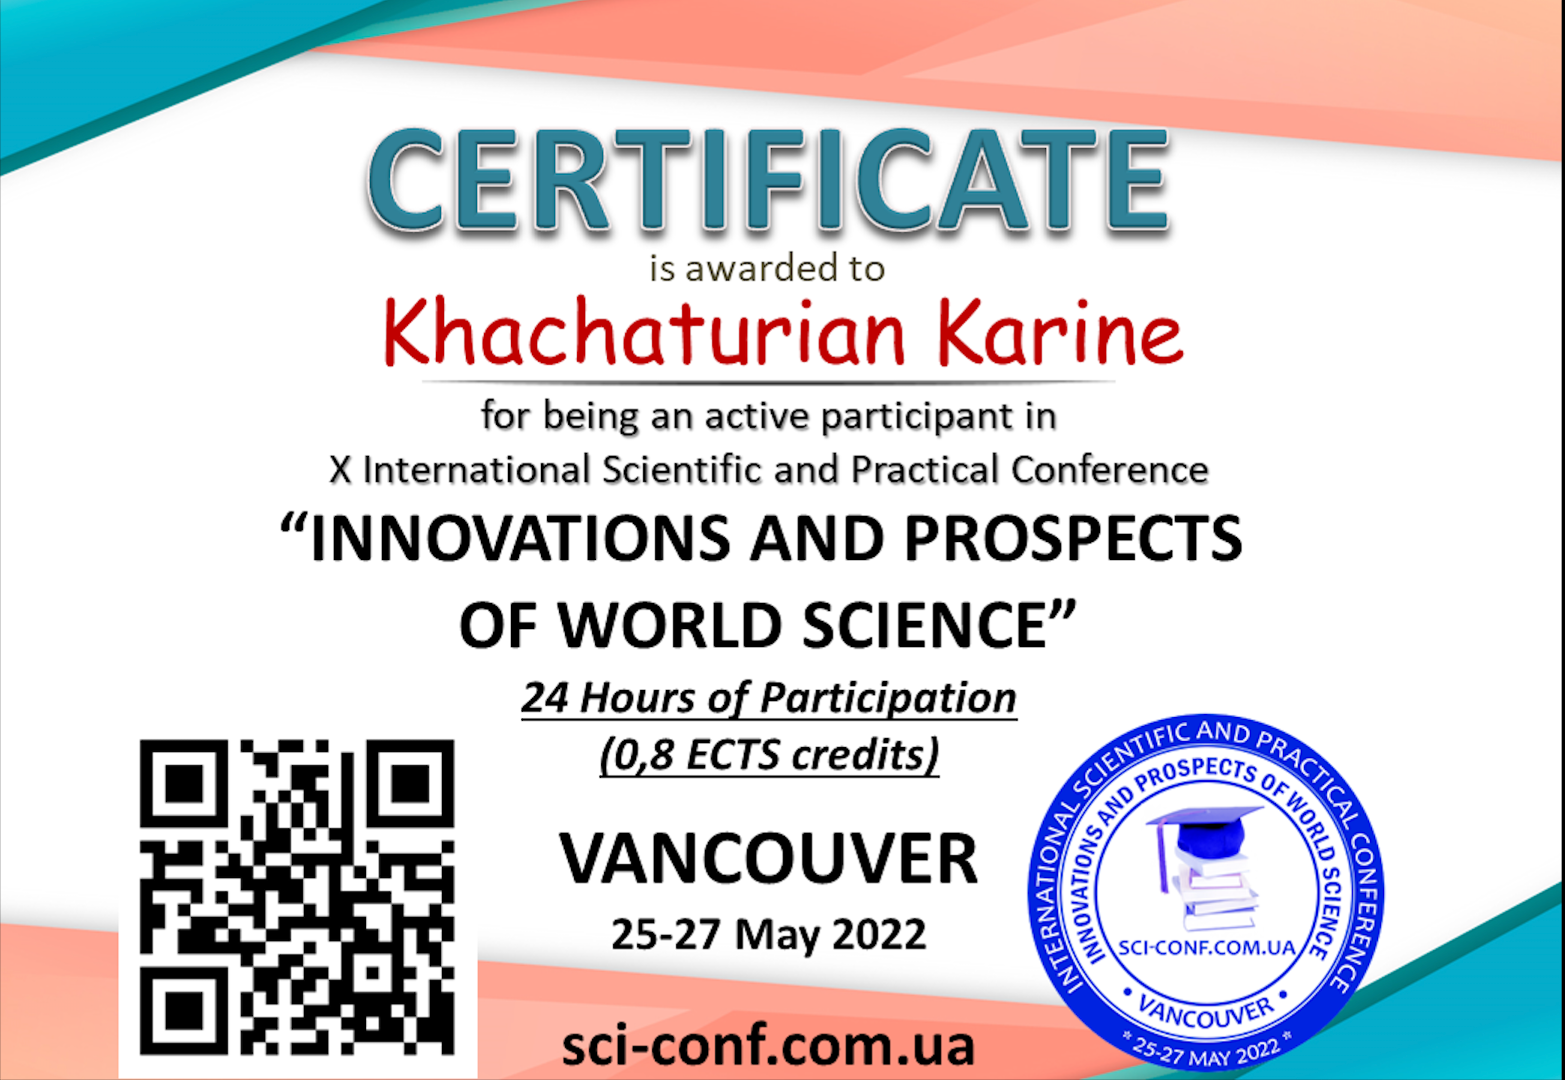 Innovations and prospects of world science